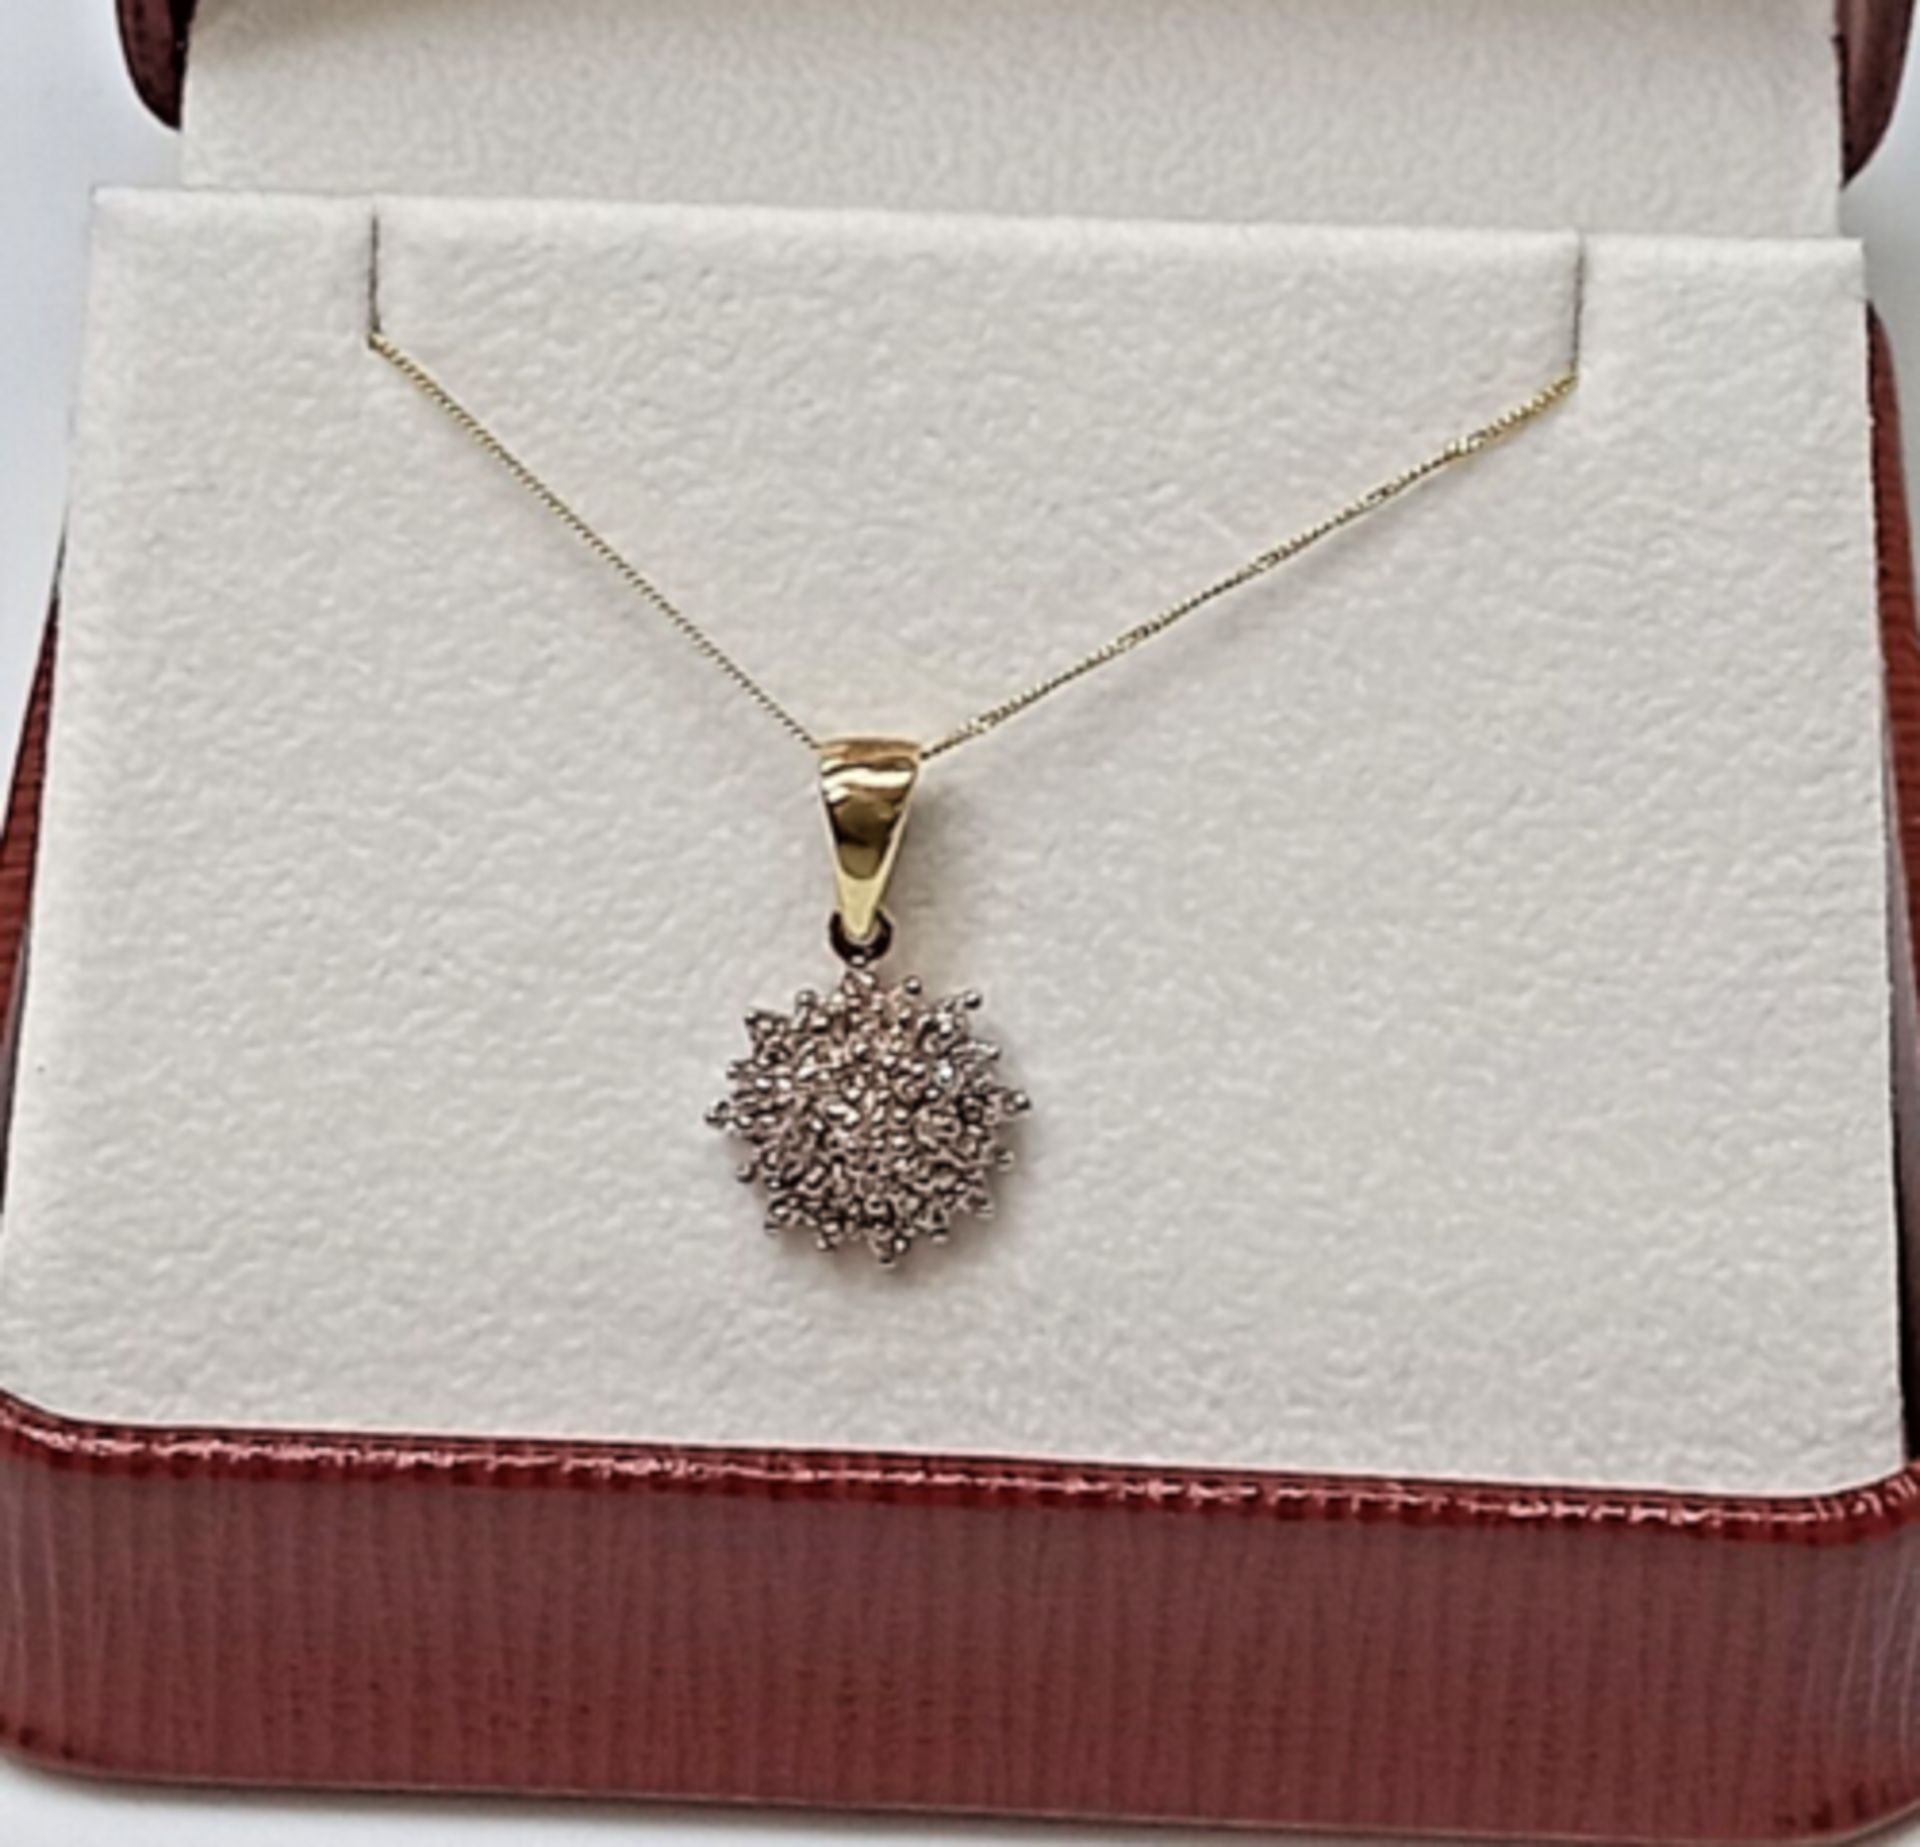 0.35CT CLUSTER DIAMOND PENDANT/9CT YELLOW GOLD IN GIFT BOX WITH VALUATION CERTIFICATE OF £995